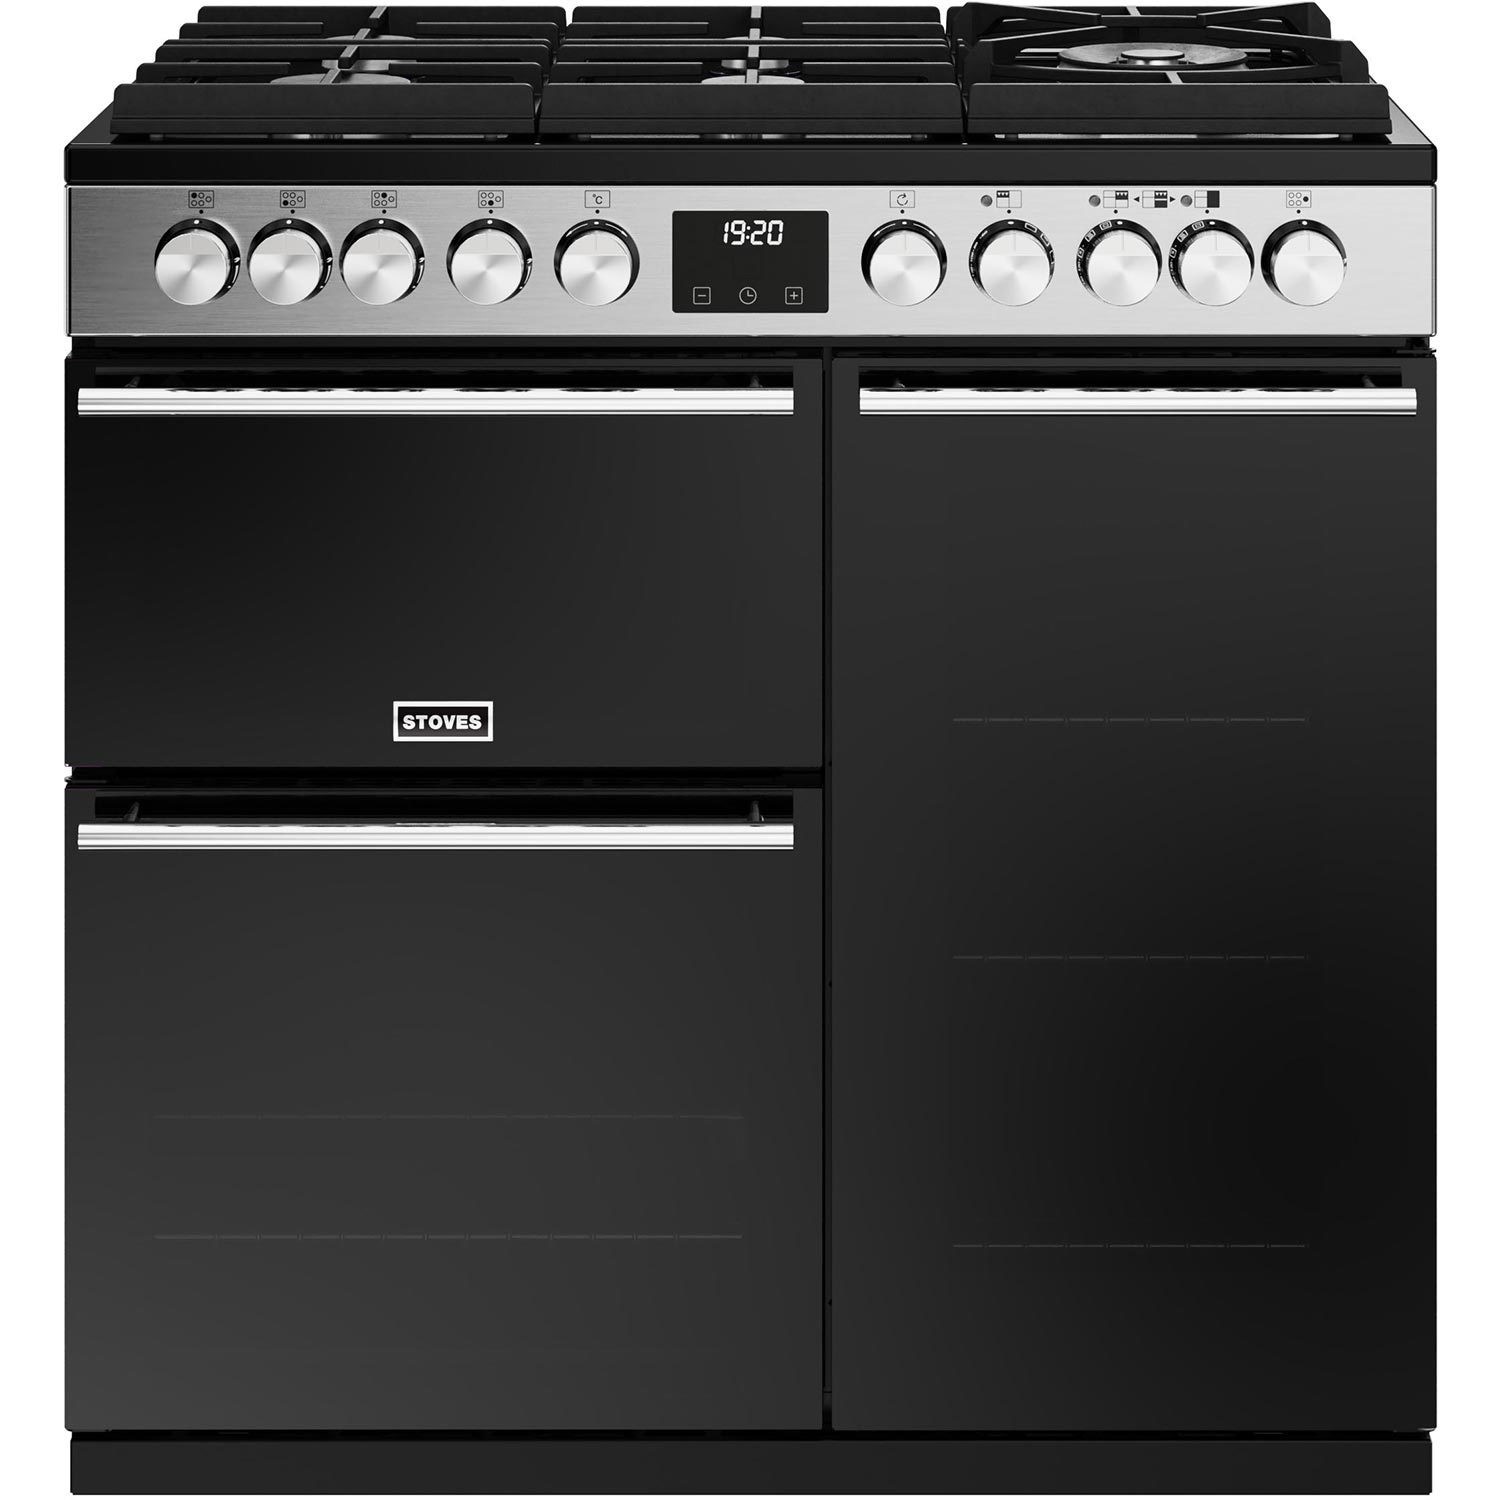 Photos - Other for Computer Stoves Precision Deluxe D900DF 90cm Dual Fuel Range Cooker - Stainless 444 